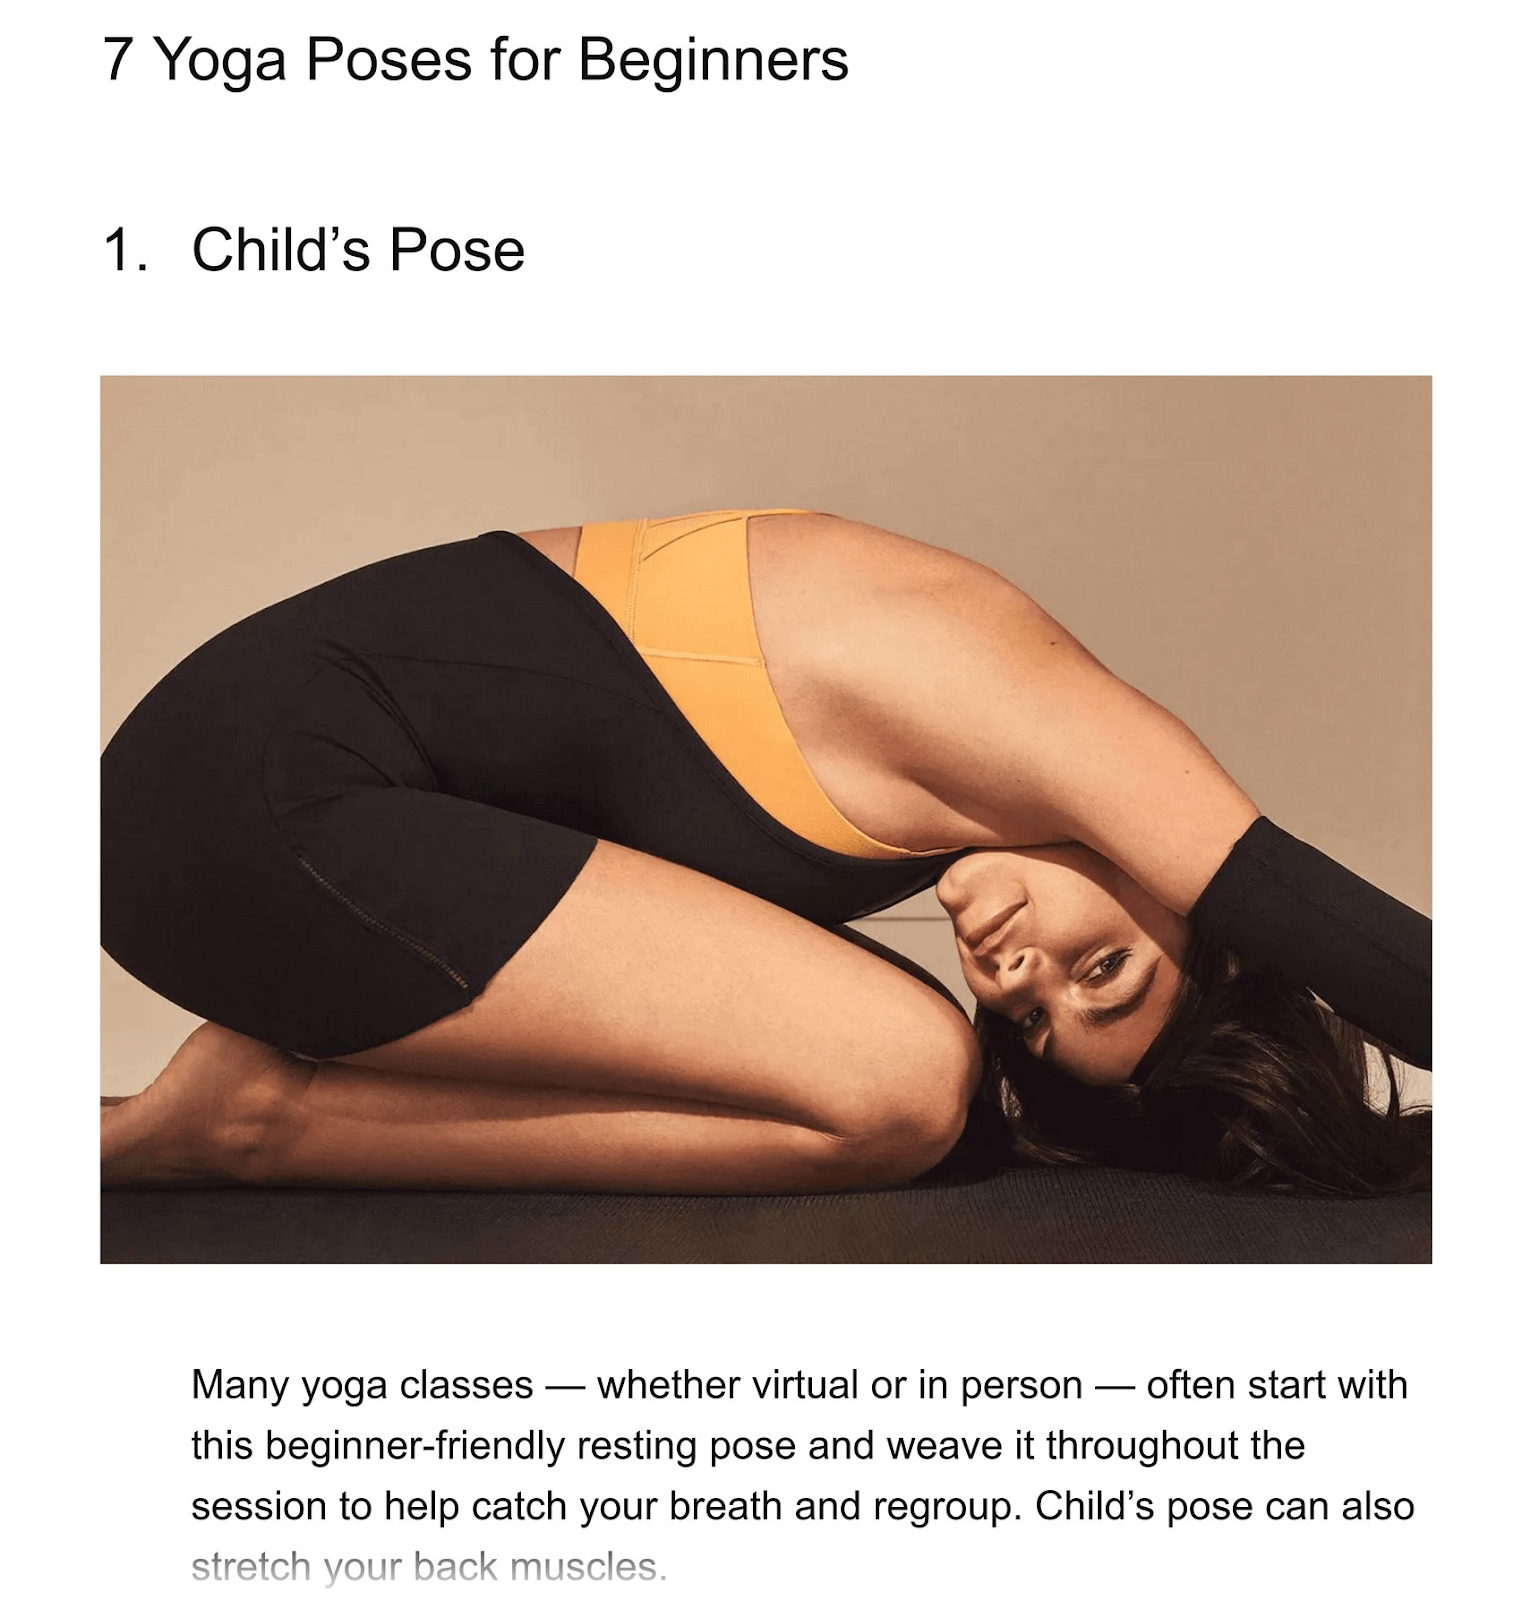 an example of a p،to for "7 Yoga Poses for Beginners" post by Nike